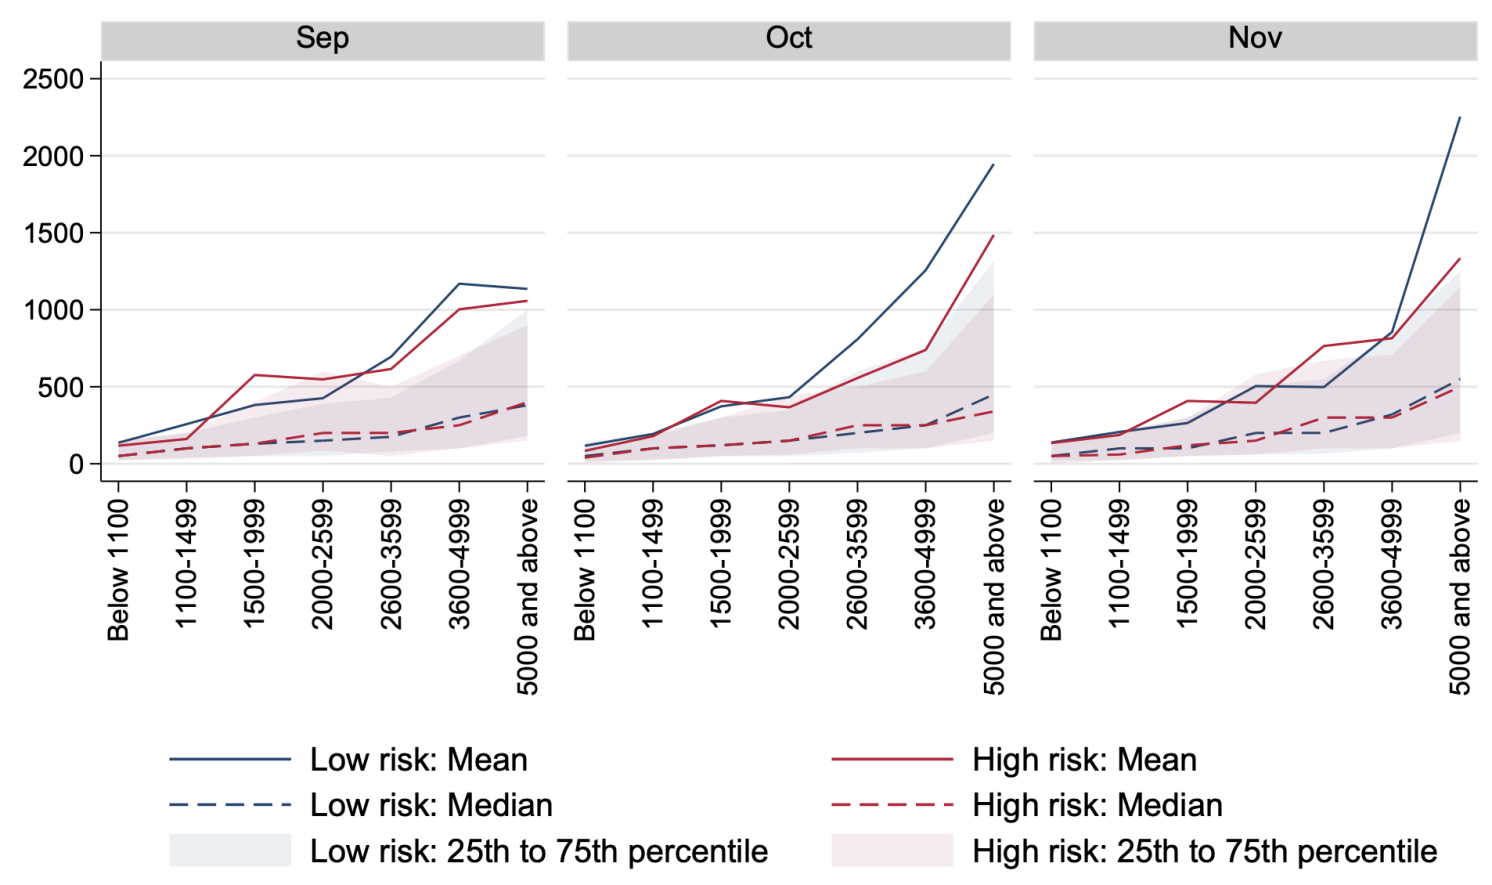 Figure 1c Engel curves of durables consumption expenditure over time, by infection risk